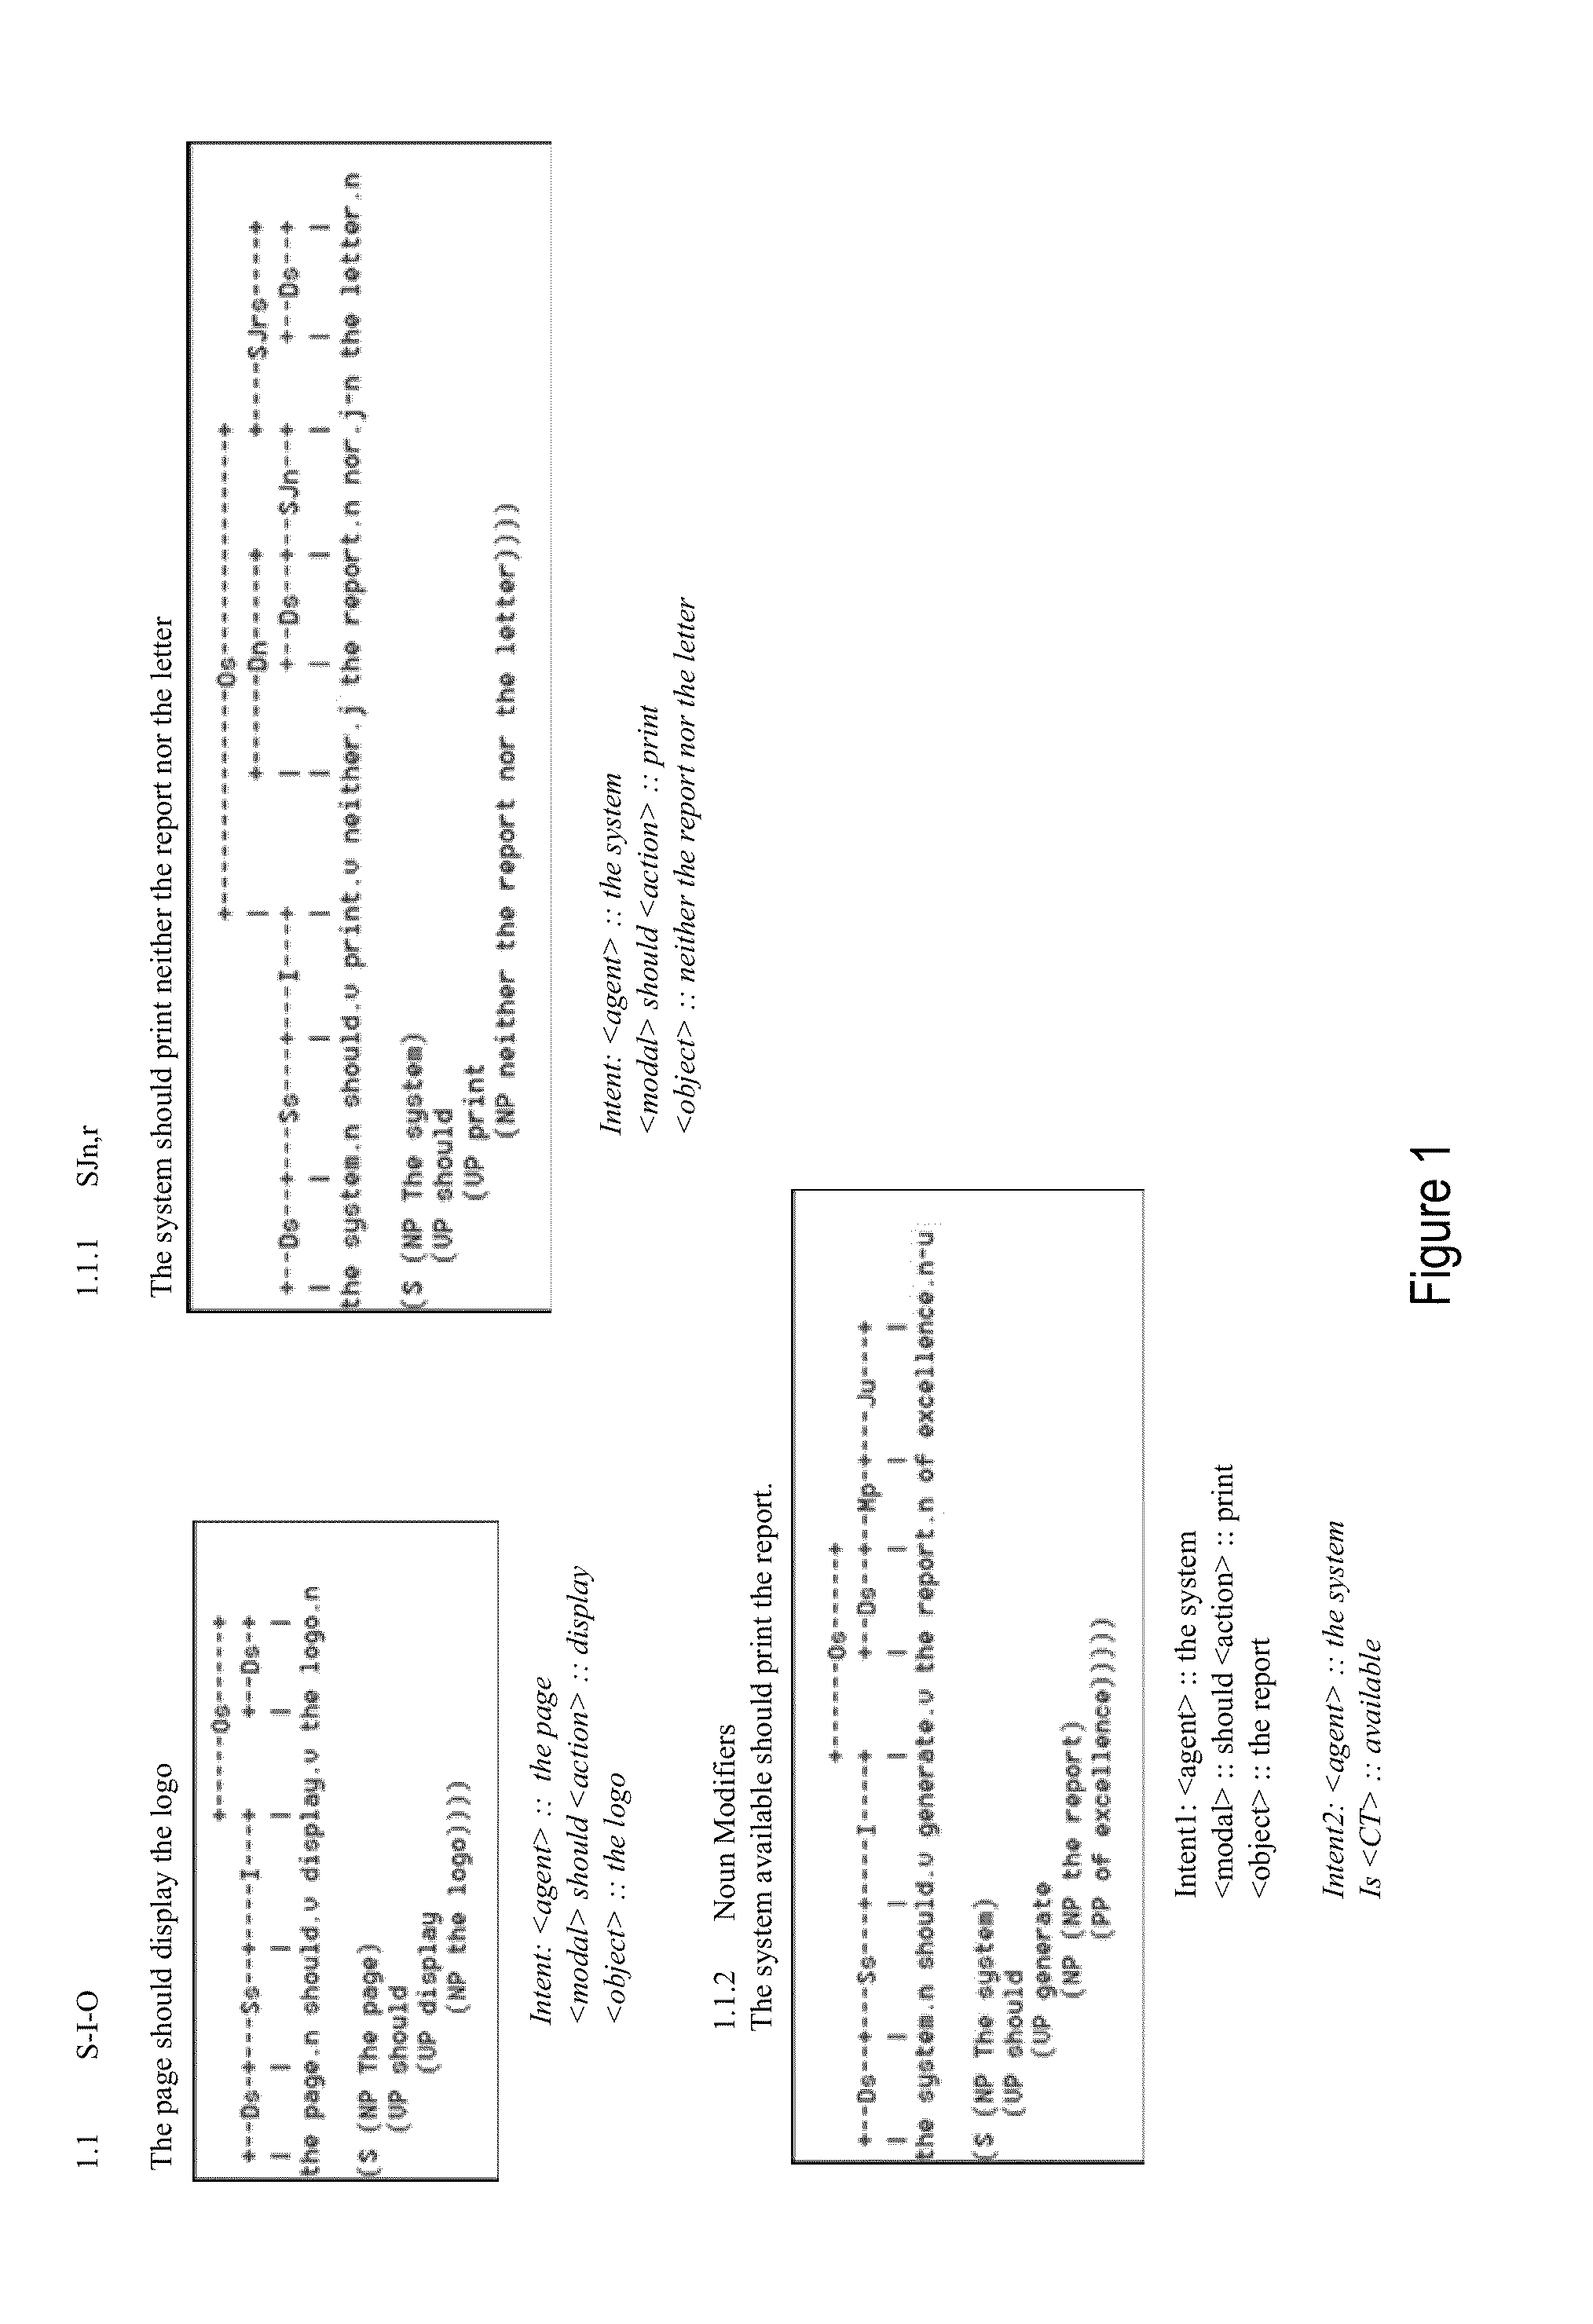 System for generating test scenarios and test conditions and expected results